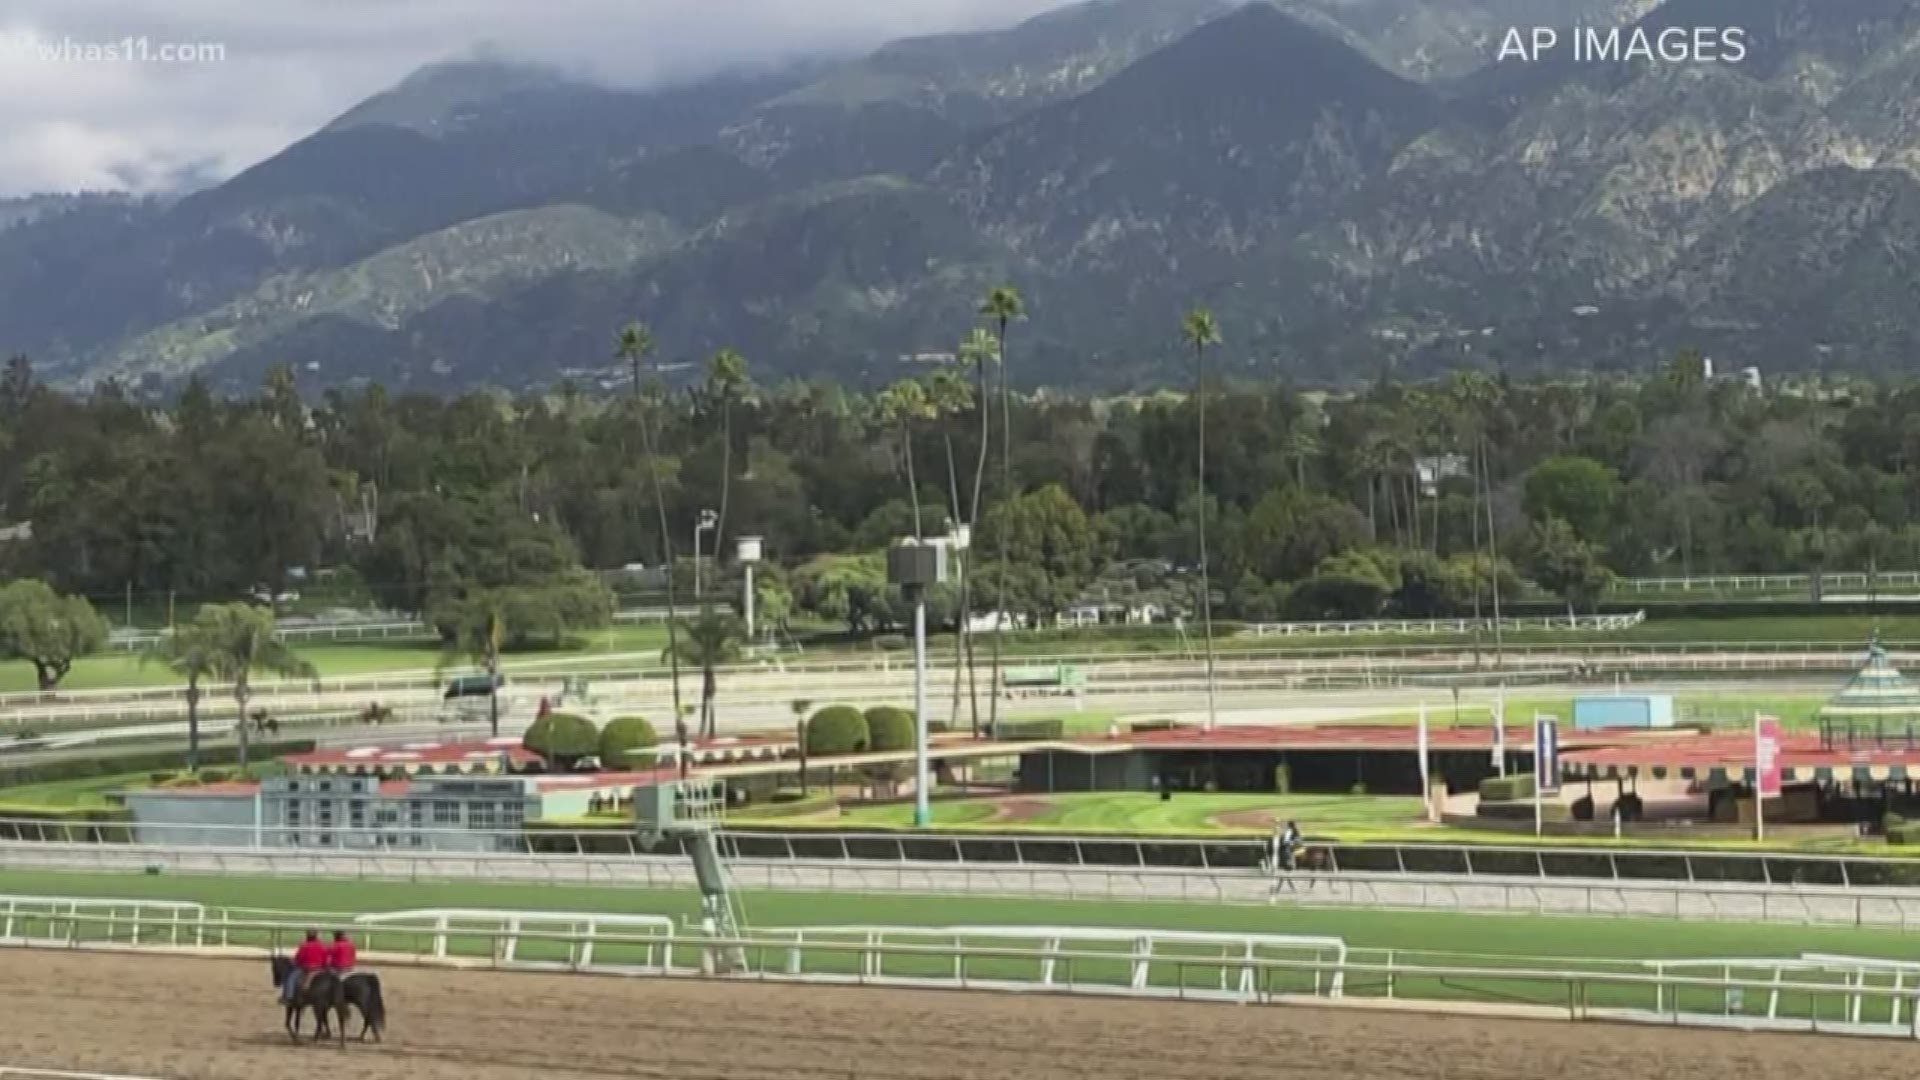 The California Horse Racing Board, along with a US Senator are calling for the race track to suspend it's meet. Santa Anita works with 13 other tracks in the country to come up with best practices for maintaining tracks and making sure horses are safe.